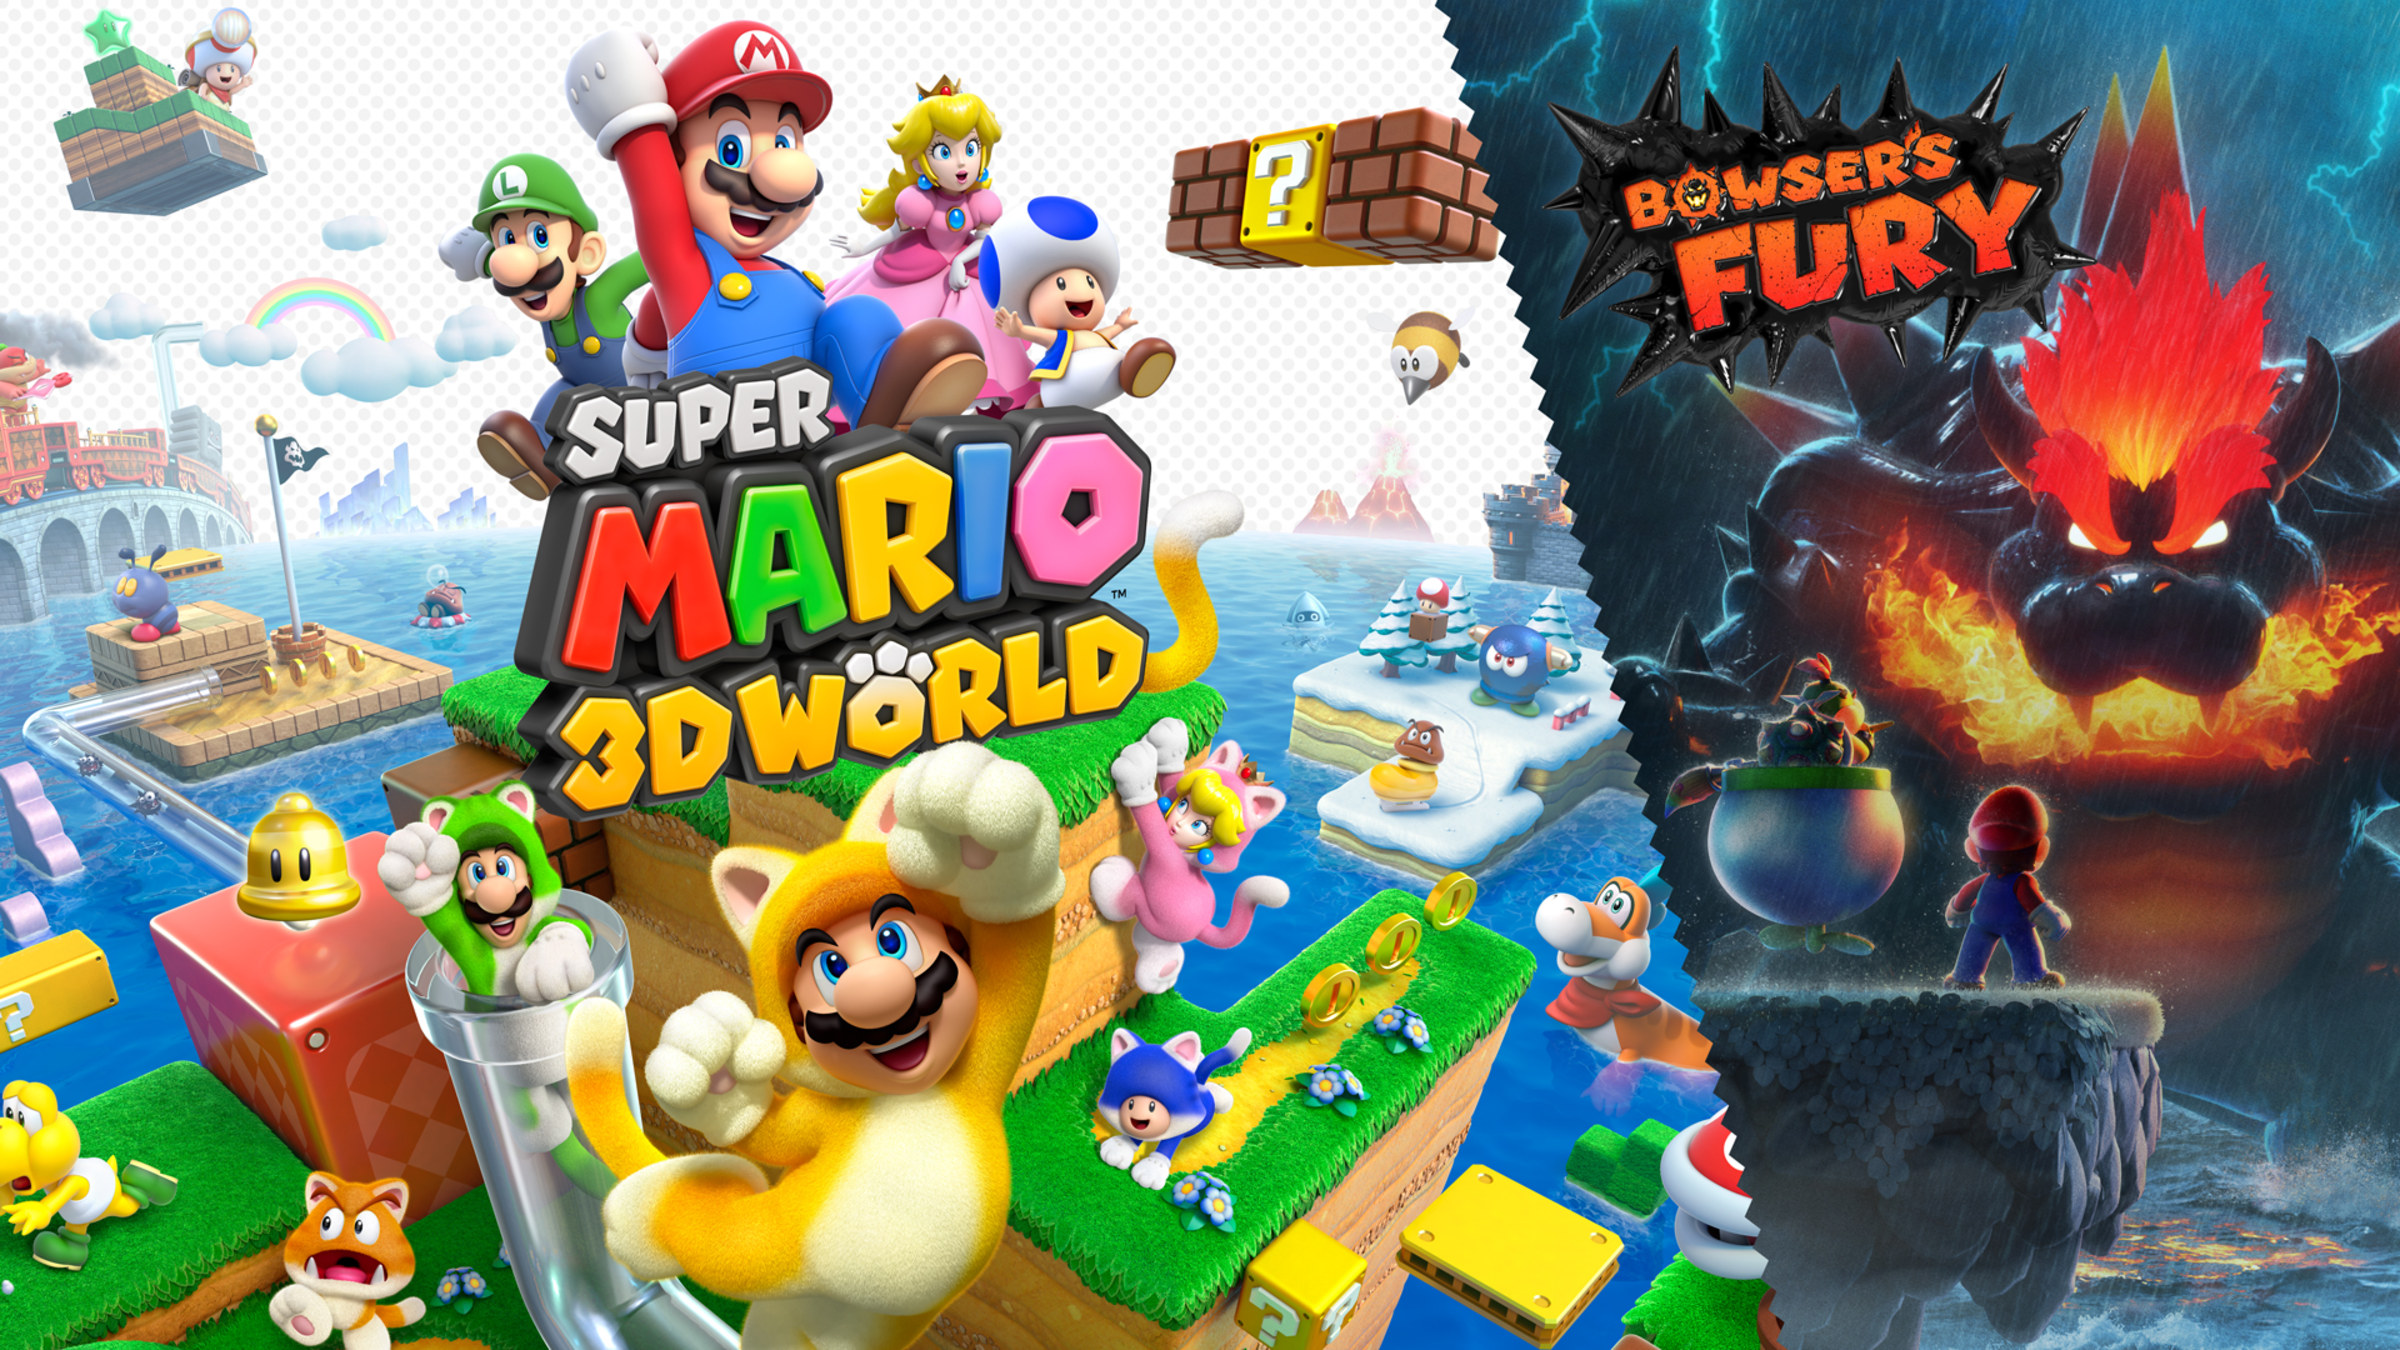 Super Mario™ 3D World + Bowser’s Fury for Nintendo Switch - Nintendo Official Site